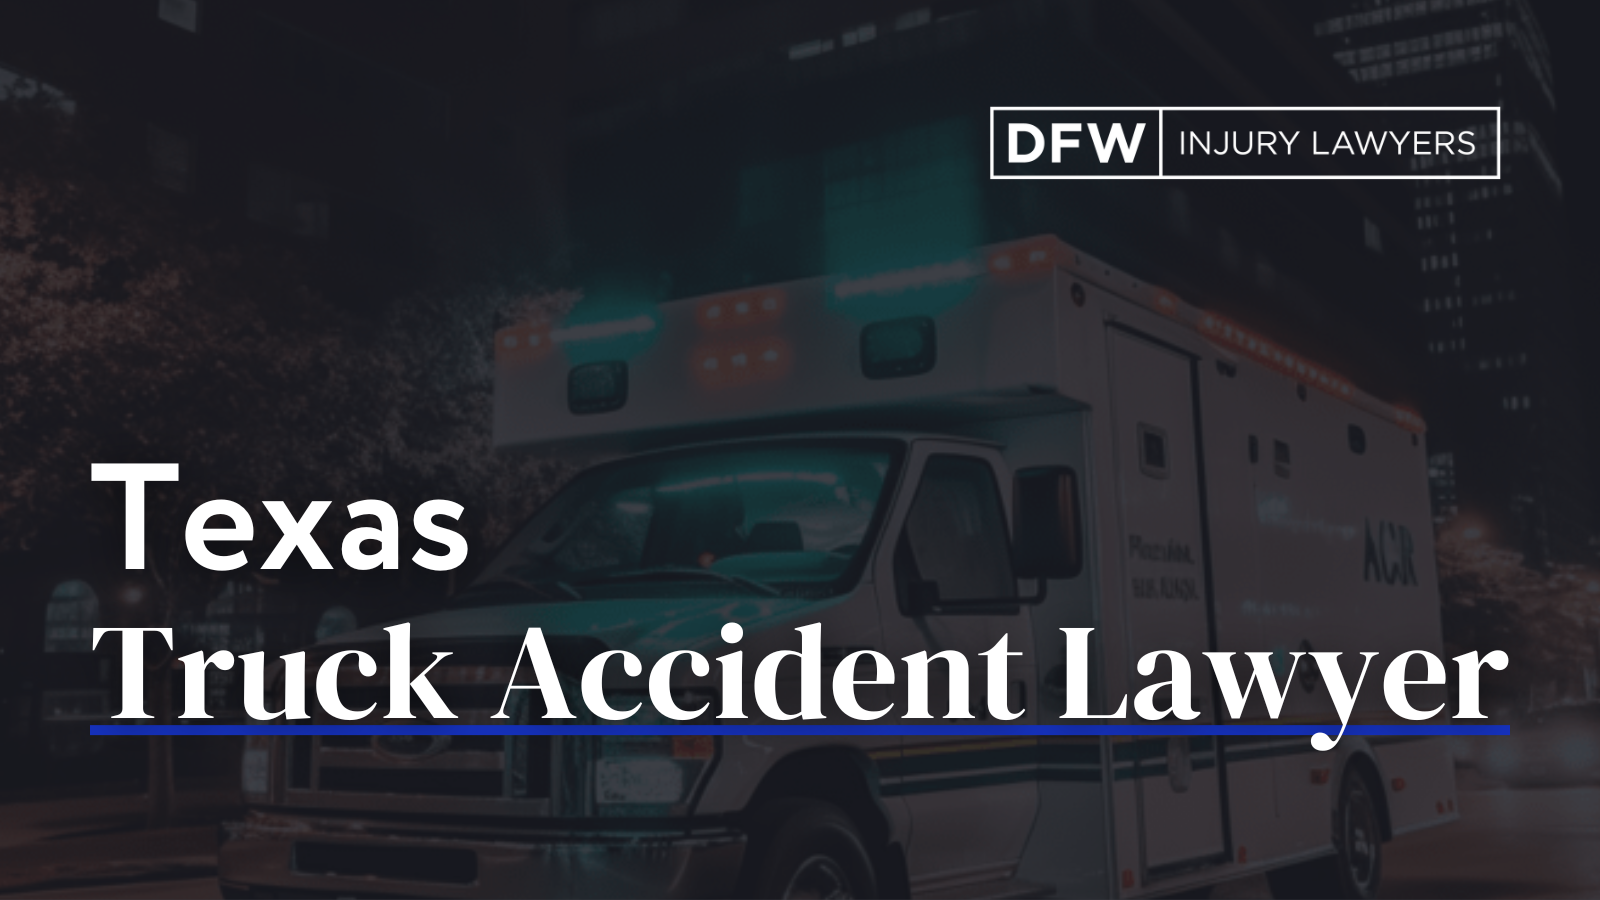 Texas Truck Accident Lawyer - DFW